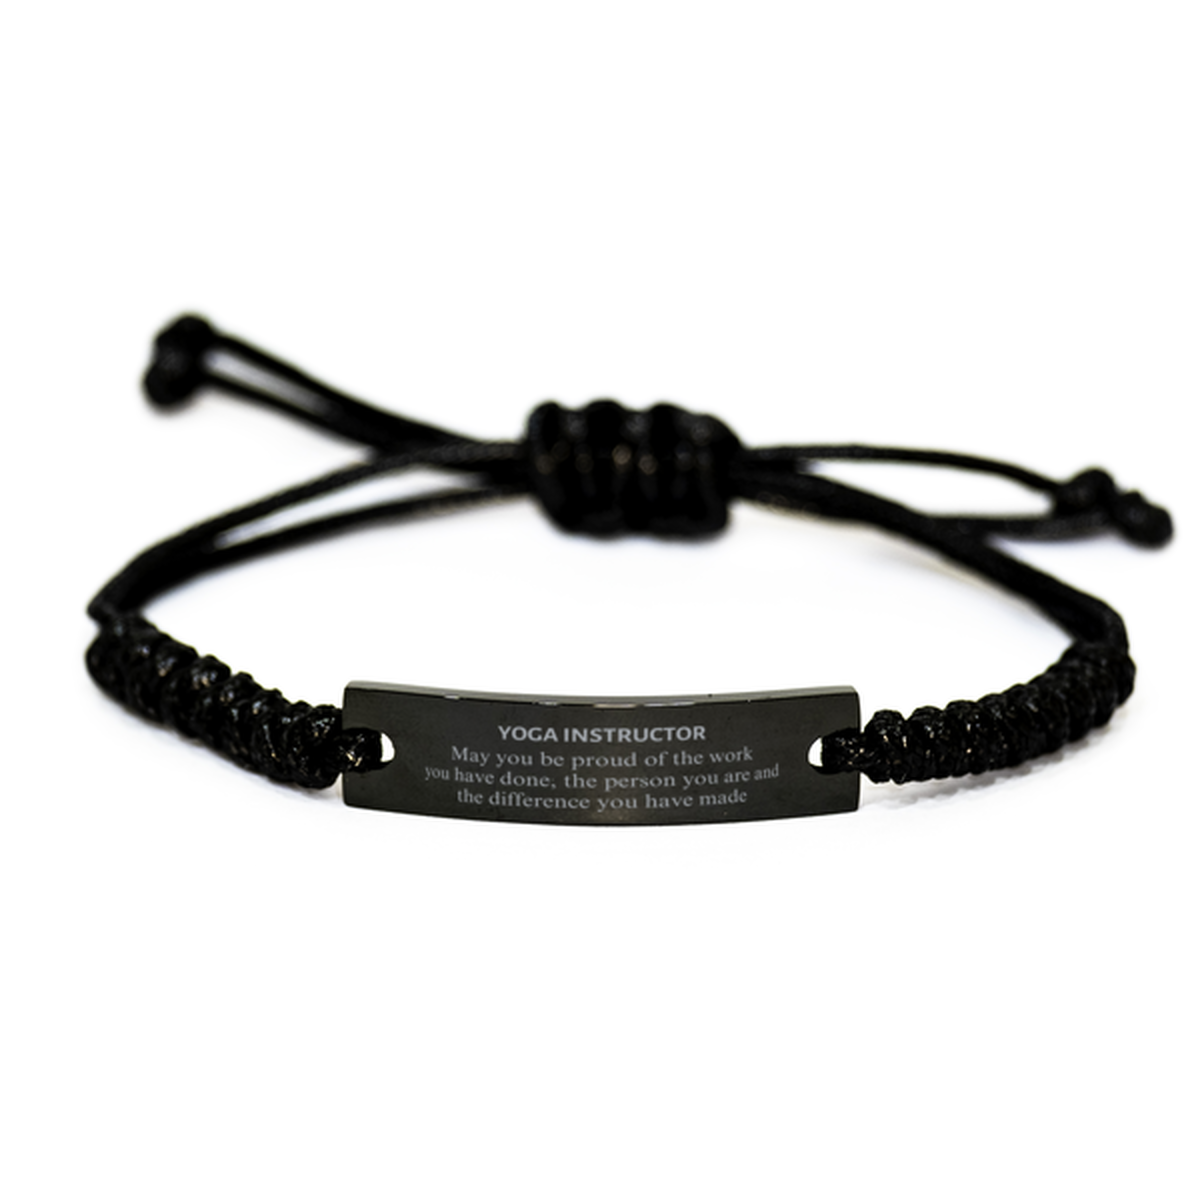 Yoga Instructor May you be proud of the work you have done, Retirement Yoga Instructor Black Rope Bracelet for Colleague Appreciation Gifts Amazing for Yoga Instructor